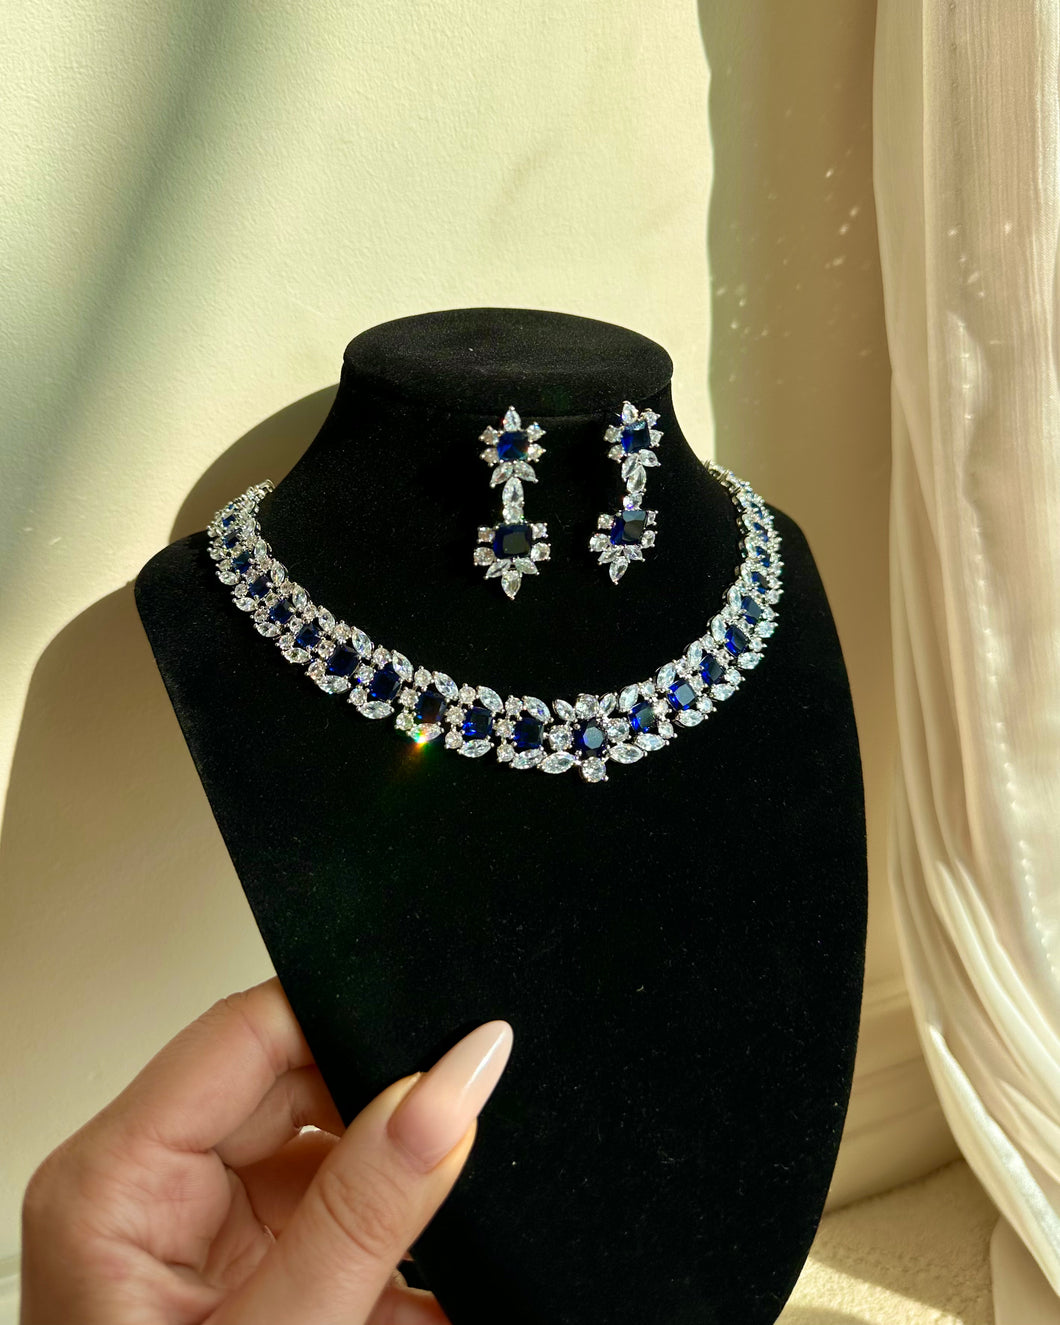 THE GRAND SAPPHIRE NECKLACE